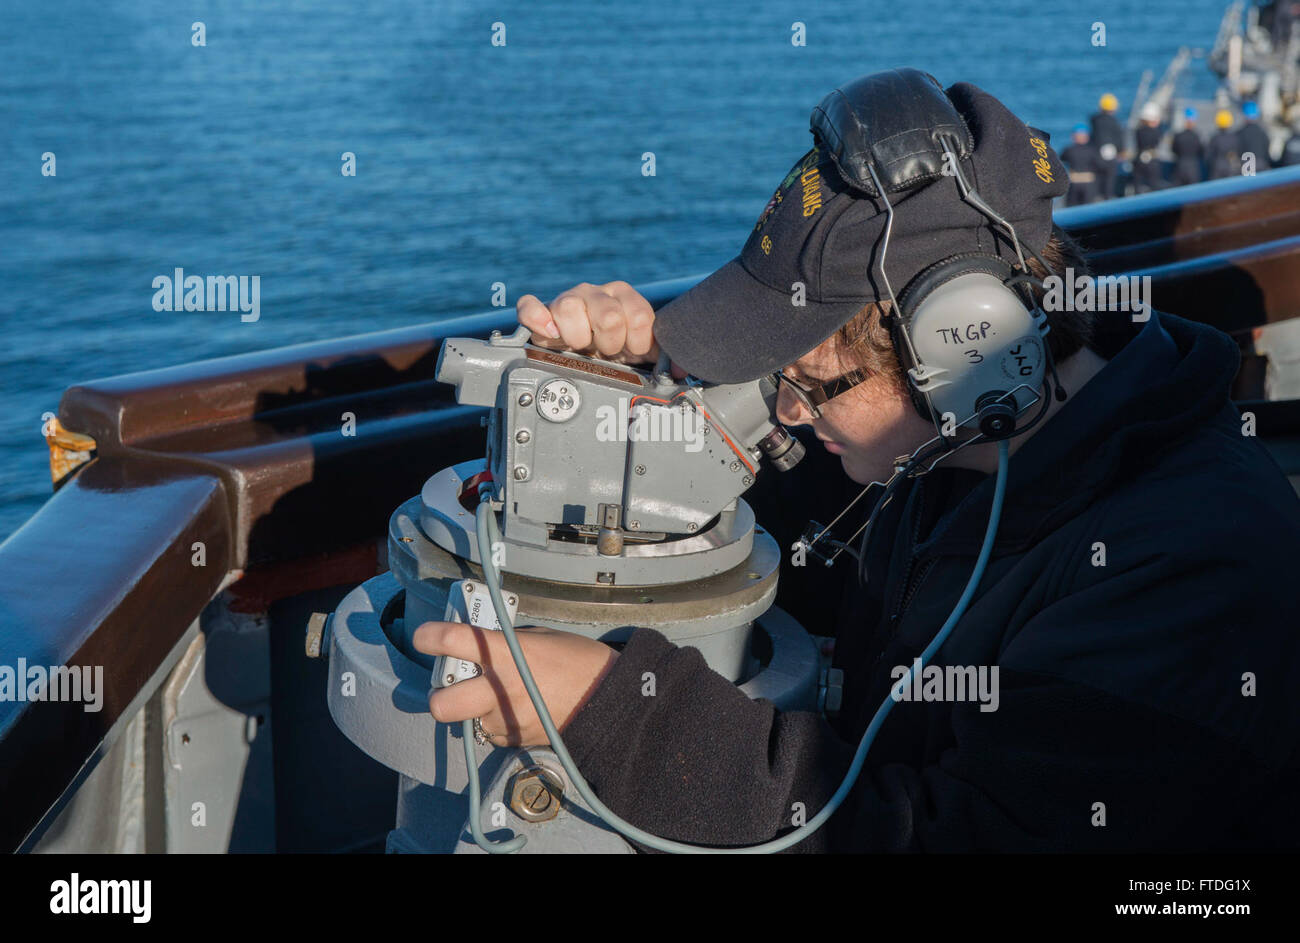 151001-N-OX430-073 FASLANE, SCOTLAND (Oct. 1, 2015) Quartermaster Seaman Recruit Kristeen Hicks looks through a telescopic alidade as the Arleigh Burke-class guided-missile destroyer USS The Sullivans (DDG 68) enters Her Majesty’s Naval Base Clyde in Faslane, Scotland. The Sullivans is in Scotland to participate in Joint Warrior, a United Kingdom-led, multinational cooperative training exercise designed to prepare NATO and allied forces for global operations. (U.S. Navy photo by Mass Communication Specialist Seaman Daniel Gaither/Released) Stock Photo